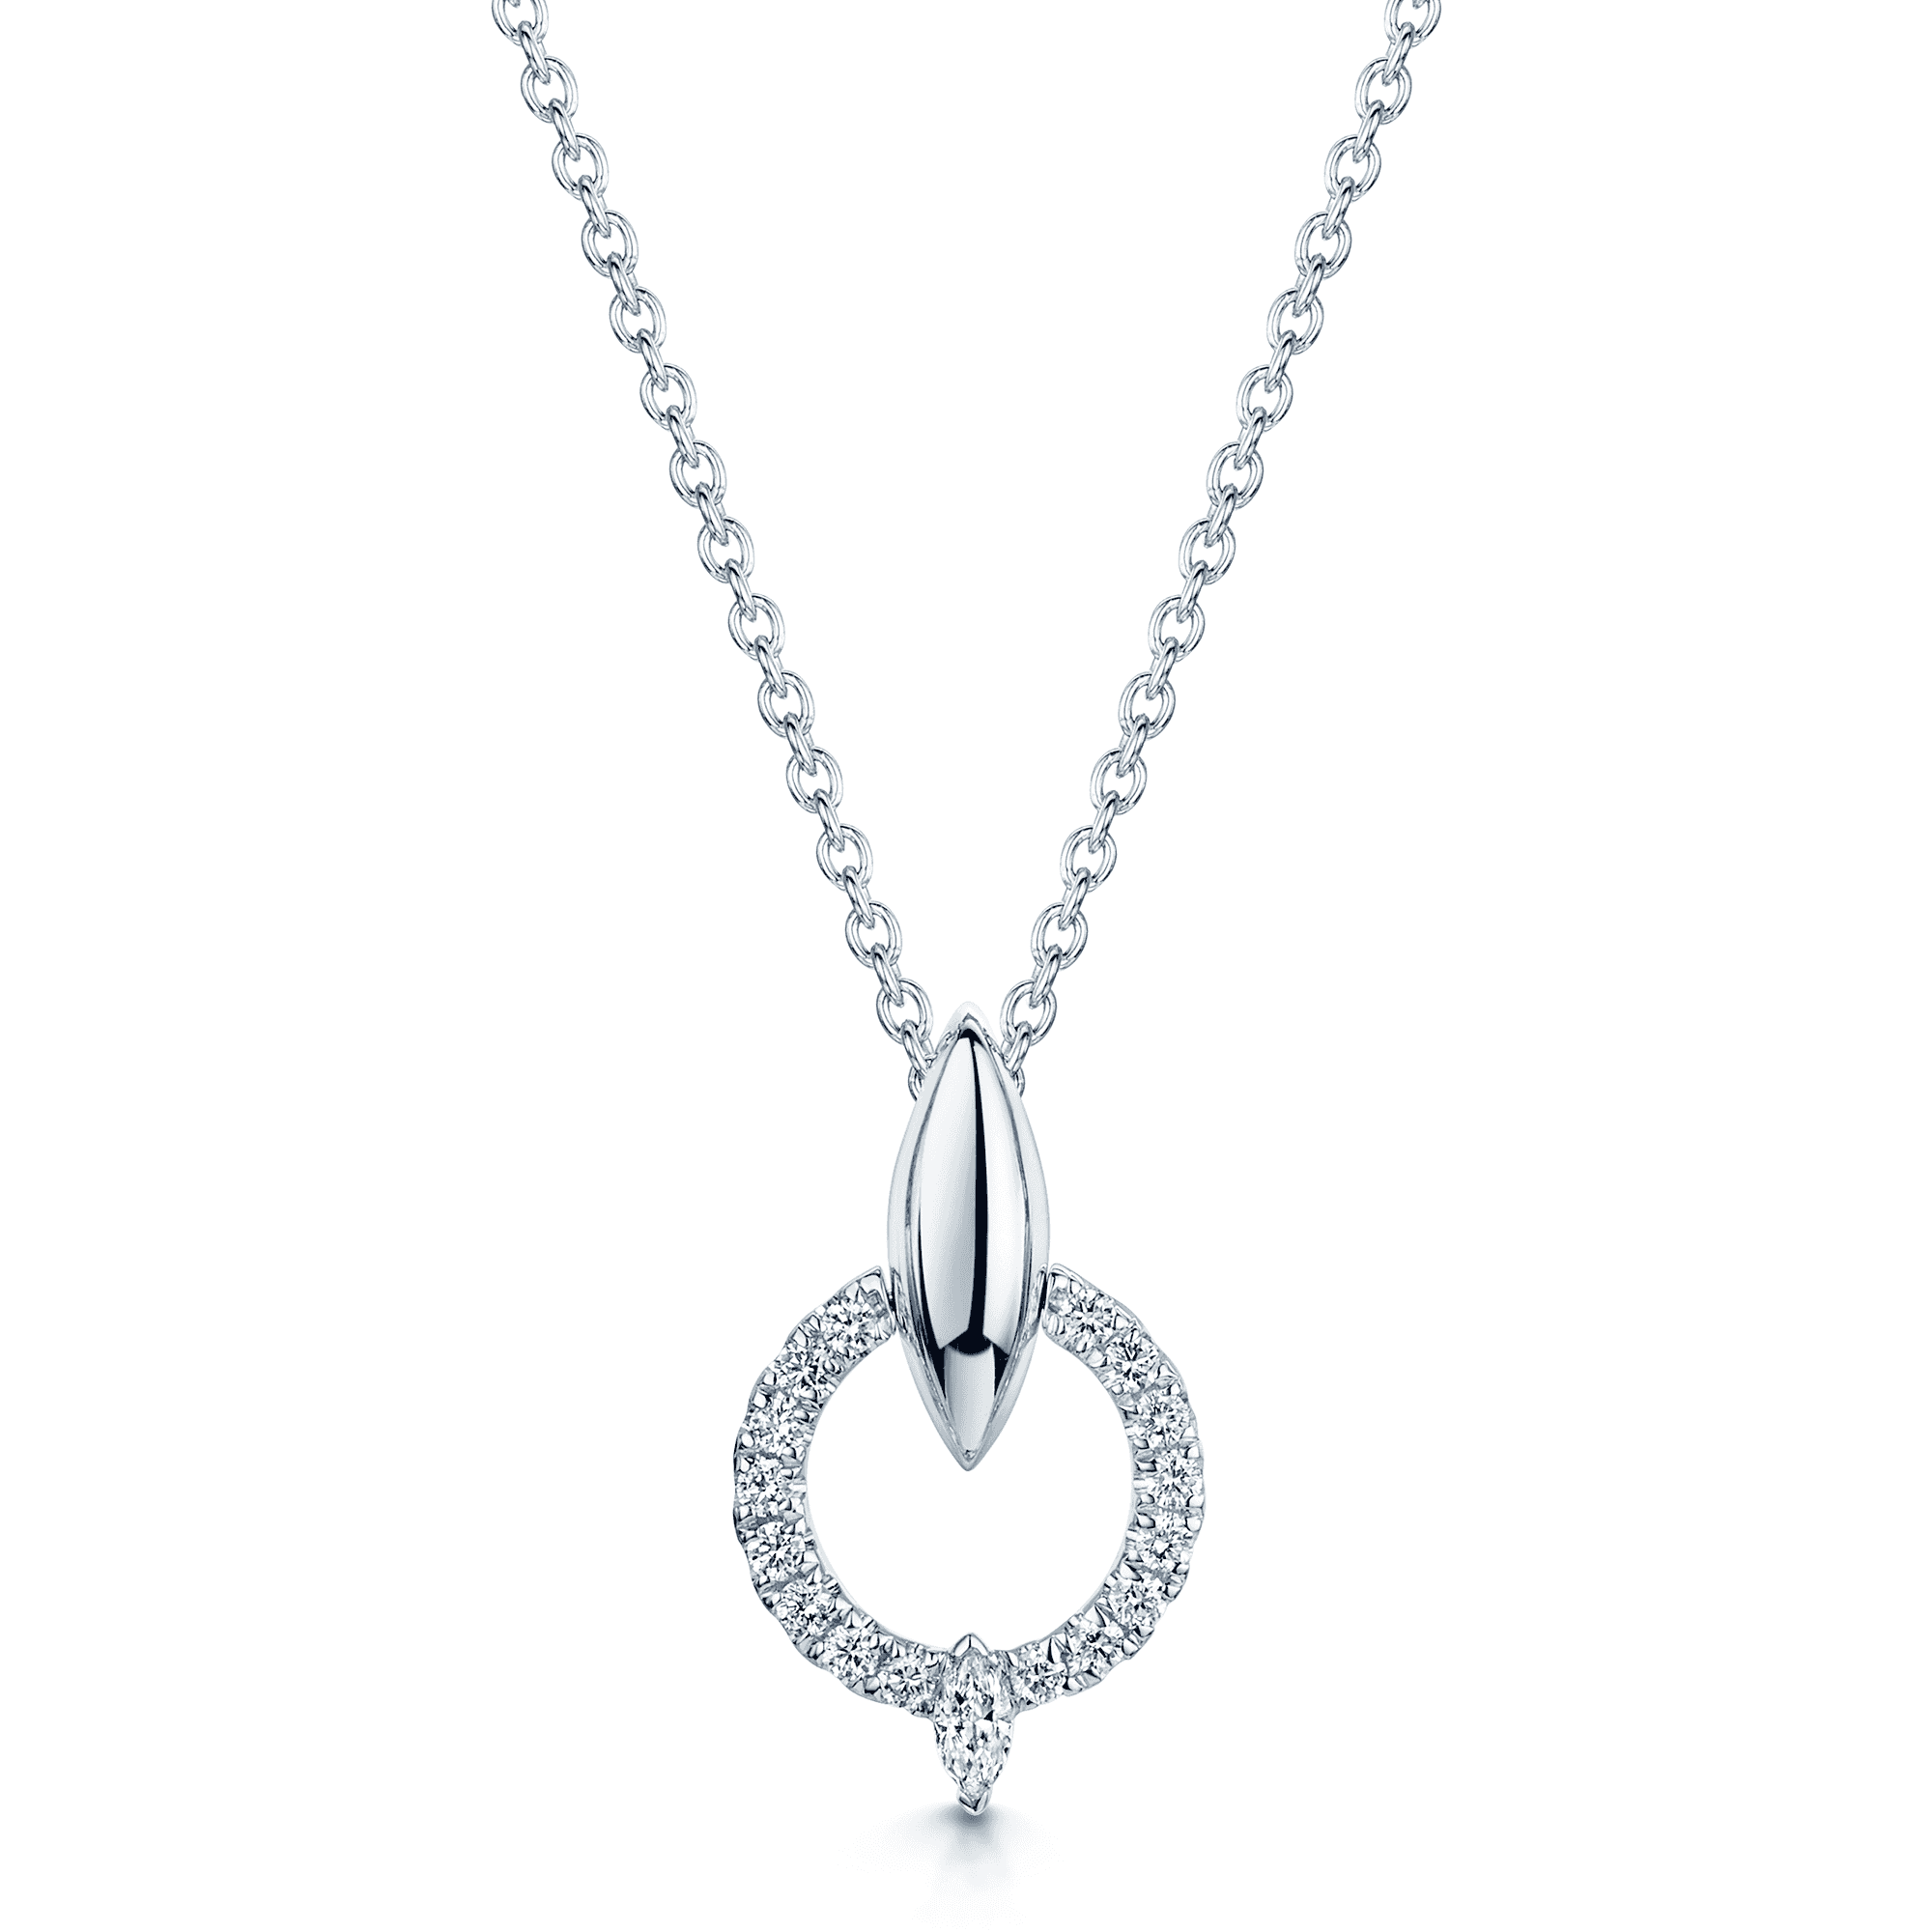 The Origin Collection 18ct White Gold Diamond Seed Drop Circle Necklace